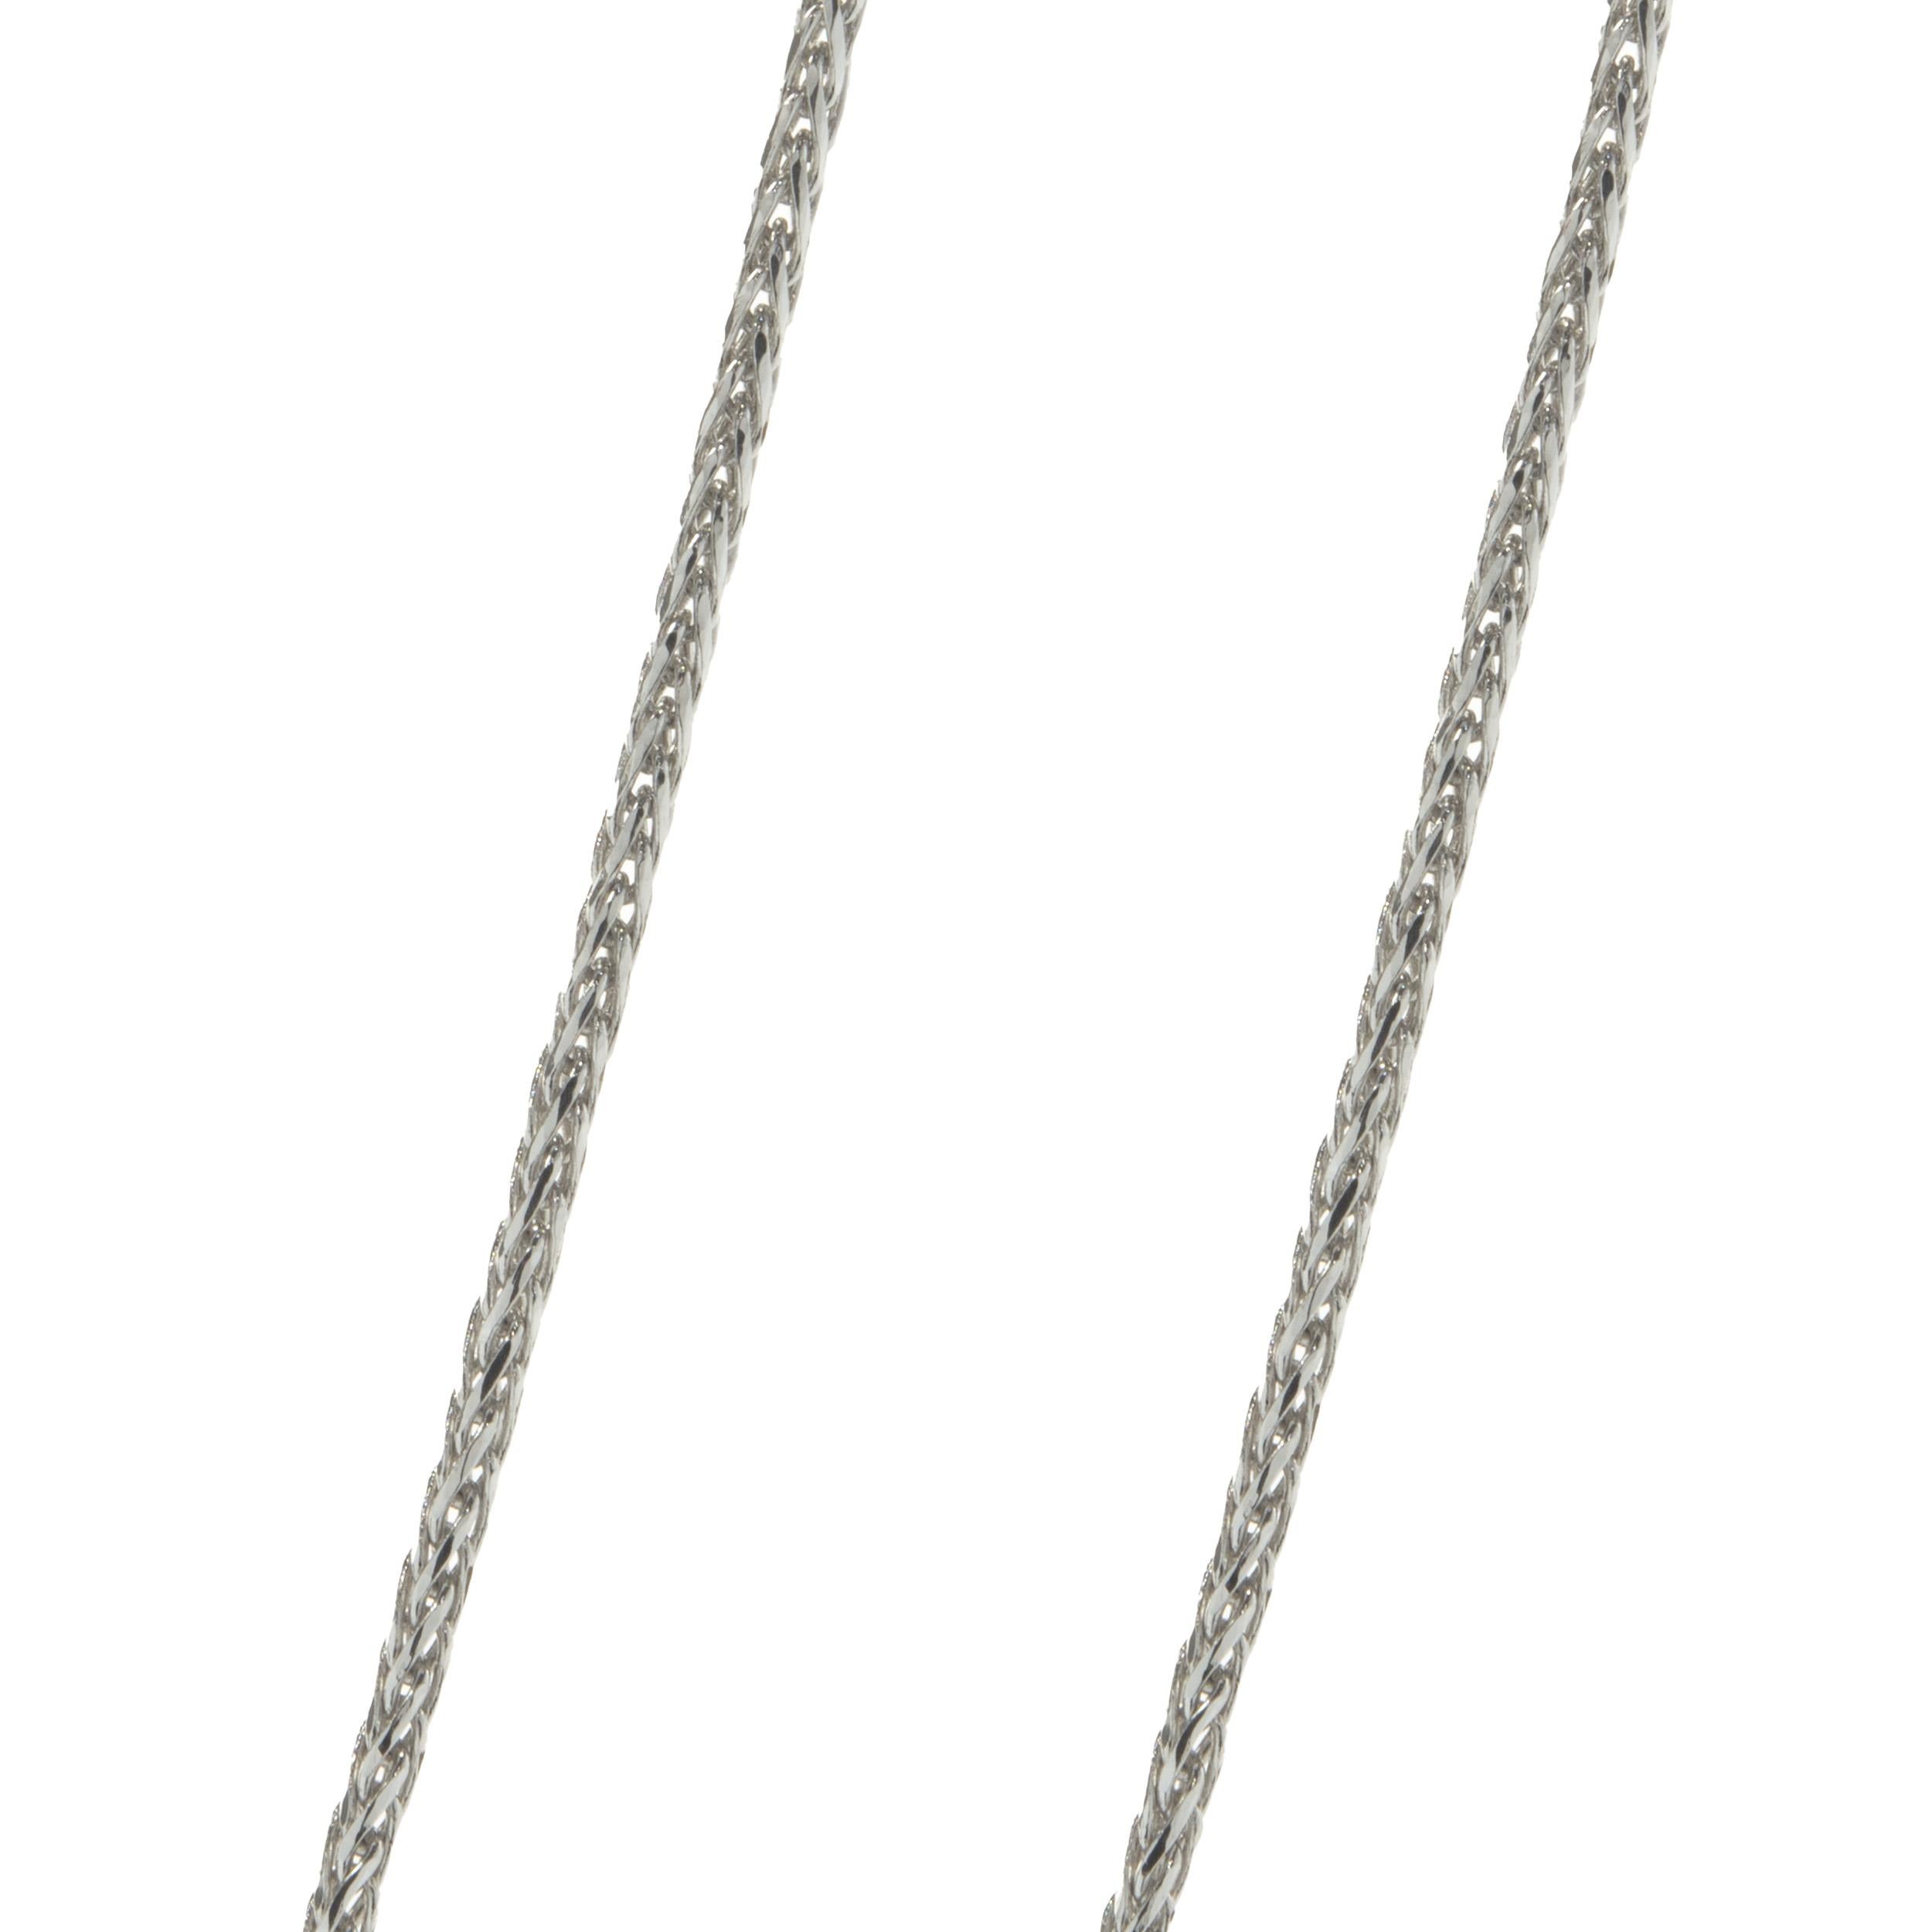 Designer: custom design
Material: 14K white gold
Diamond: round brilliant cut = 0.50cttw
Color: H
Clarity: SI1
Dimensions: necklace measures 18-inches in length 
Weight: 1.97 grams